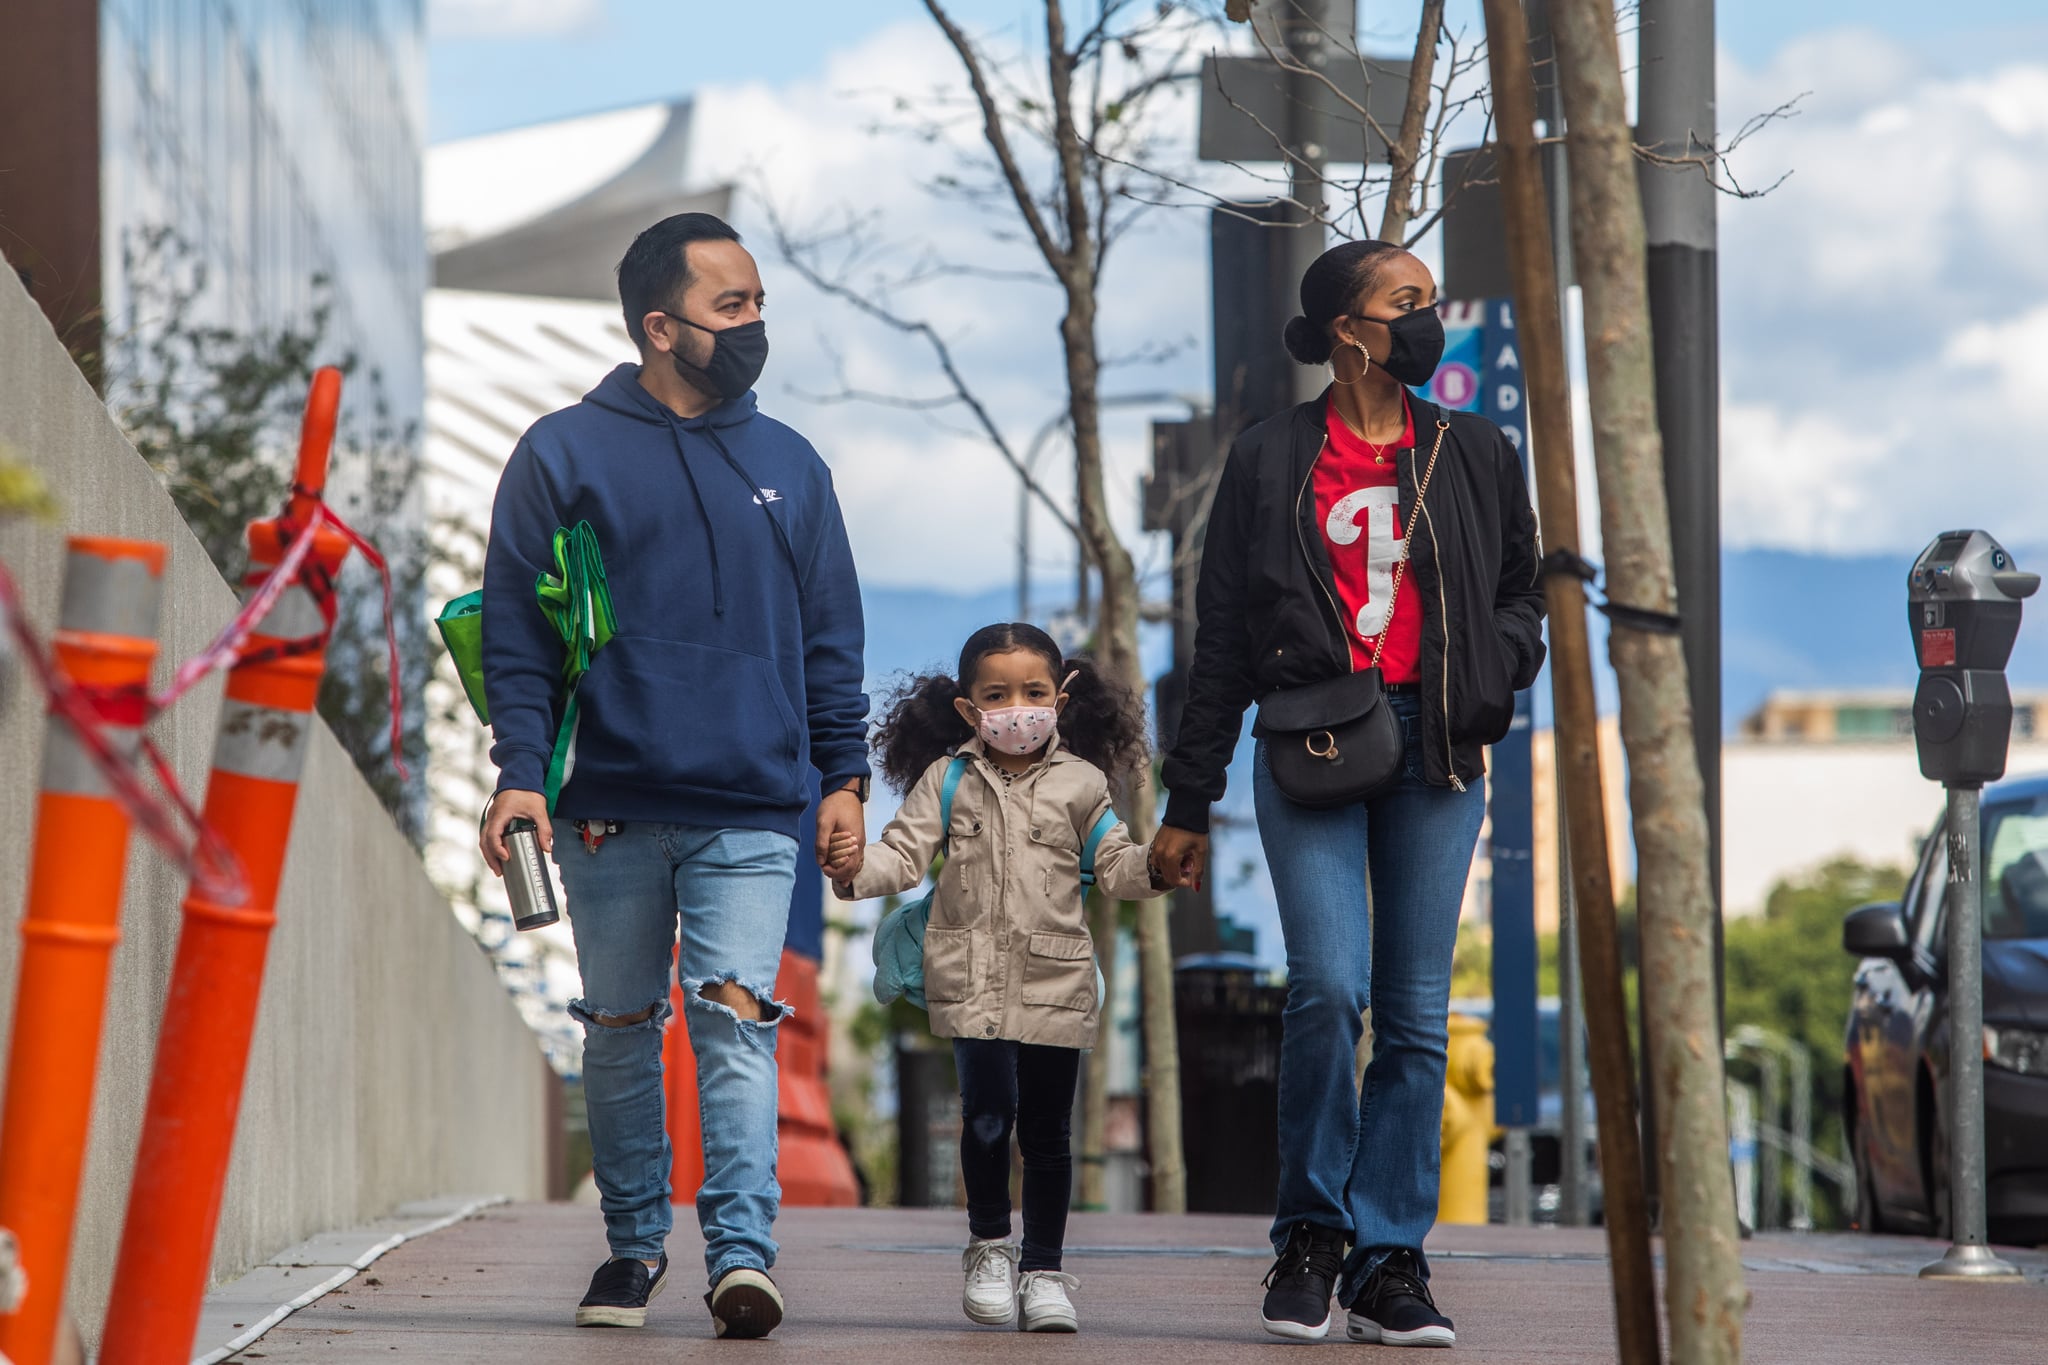 A family walks wearing masks in Downtown Los Angeles on March 22, 2020, during the coronavirus (COVID-19) outbreak. - The US president on March 22 said he had ordered the deployment of emergency medical stations with capacity of 4,000 hospital beds to coronavirus hotspots around the United States. (Photo by Apu GOMES / AFP) (Photo by APU GOMES/AFP via Getty Images)